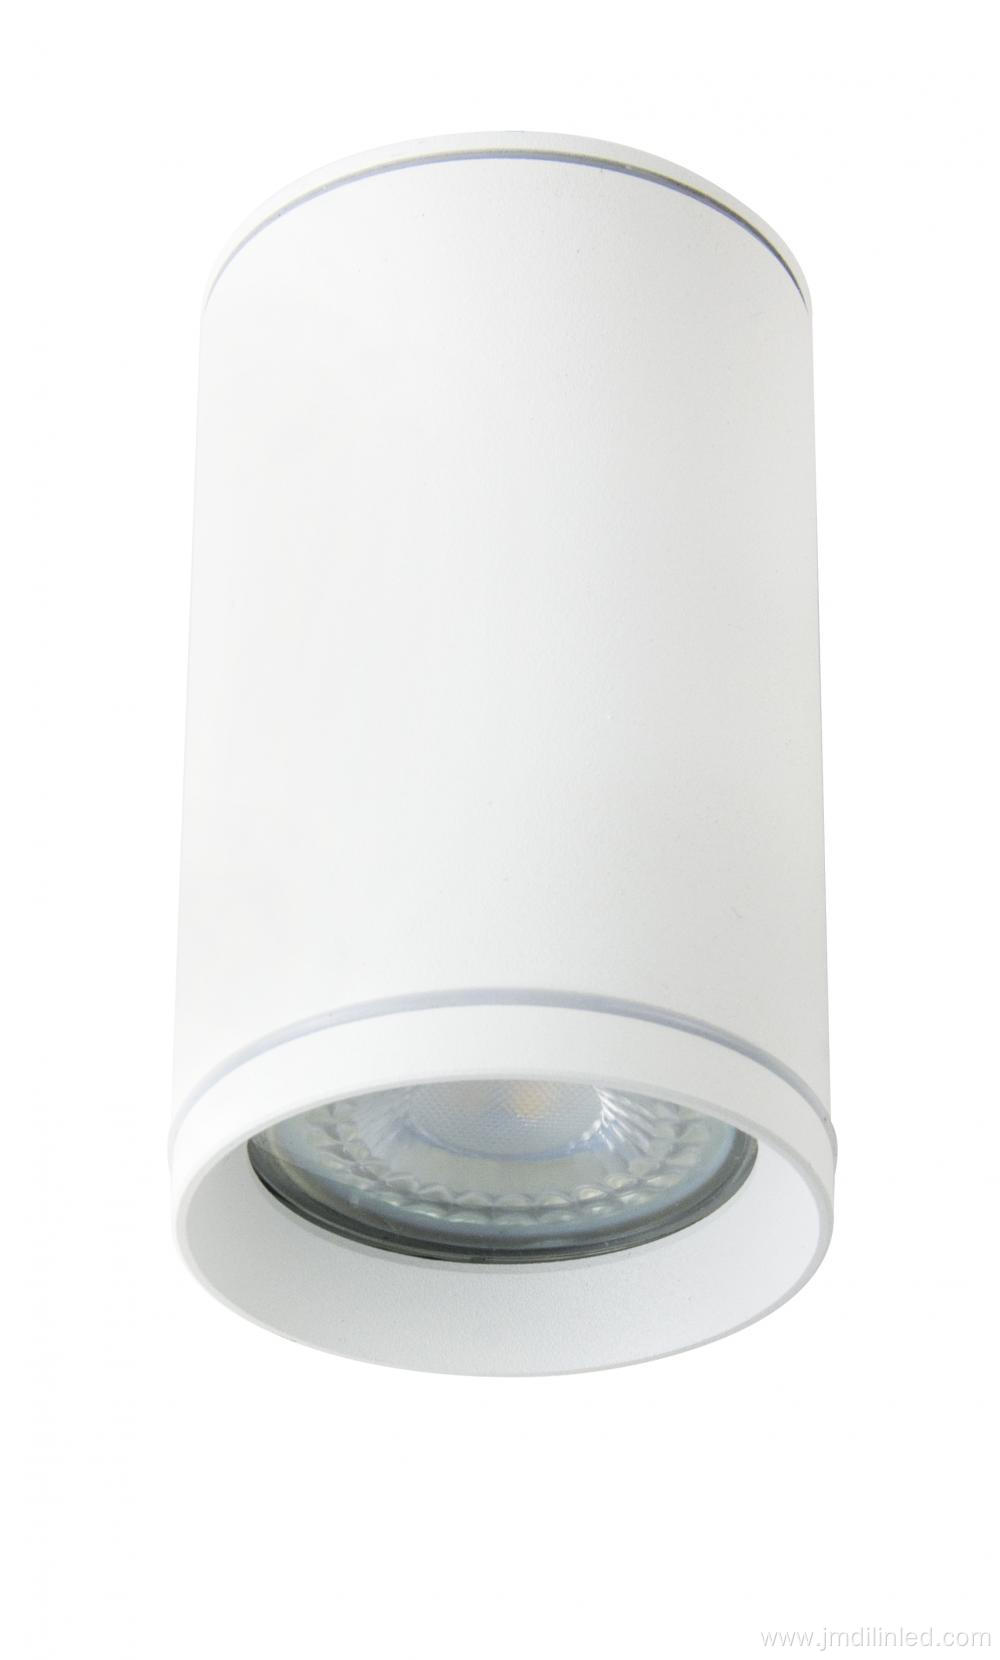 Wall Mounted Light fixture with GU10 holder